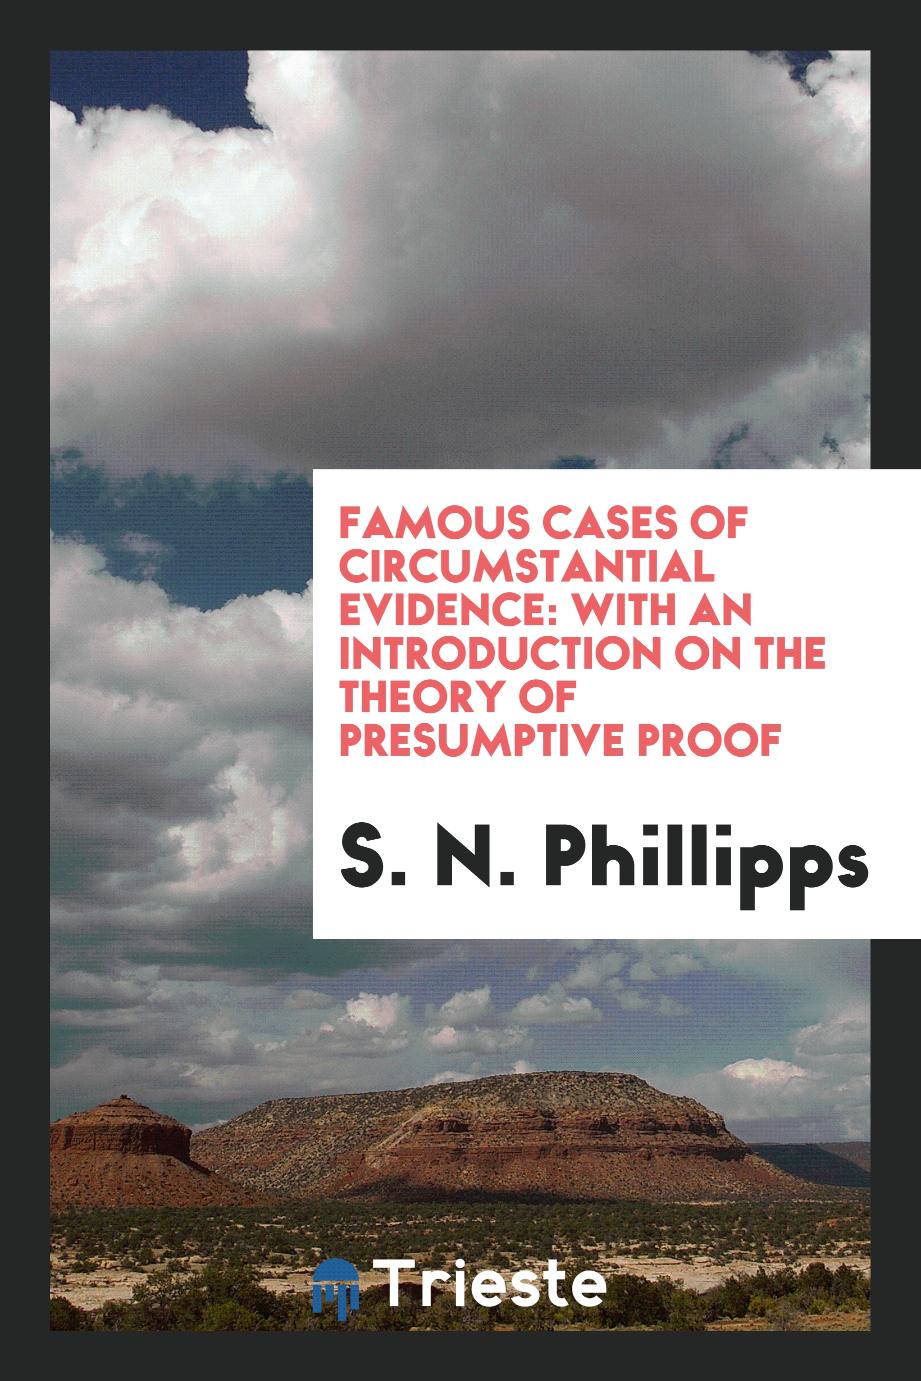 Famous Cases of Circumstantial Evidence: With an Introduction on the Theory of Presumptive Proof